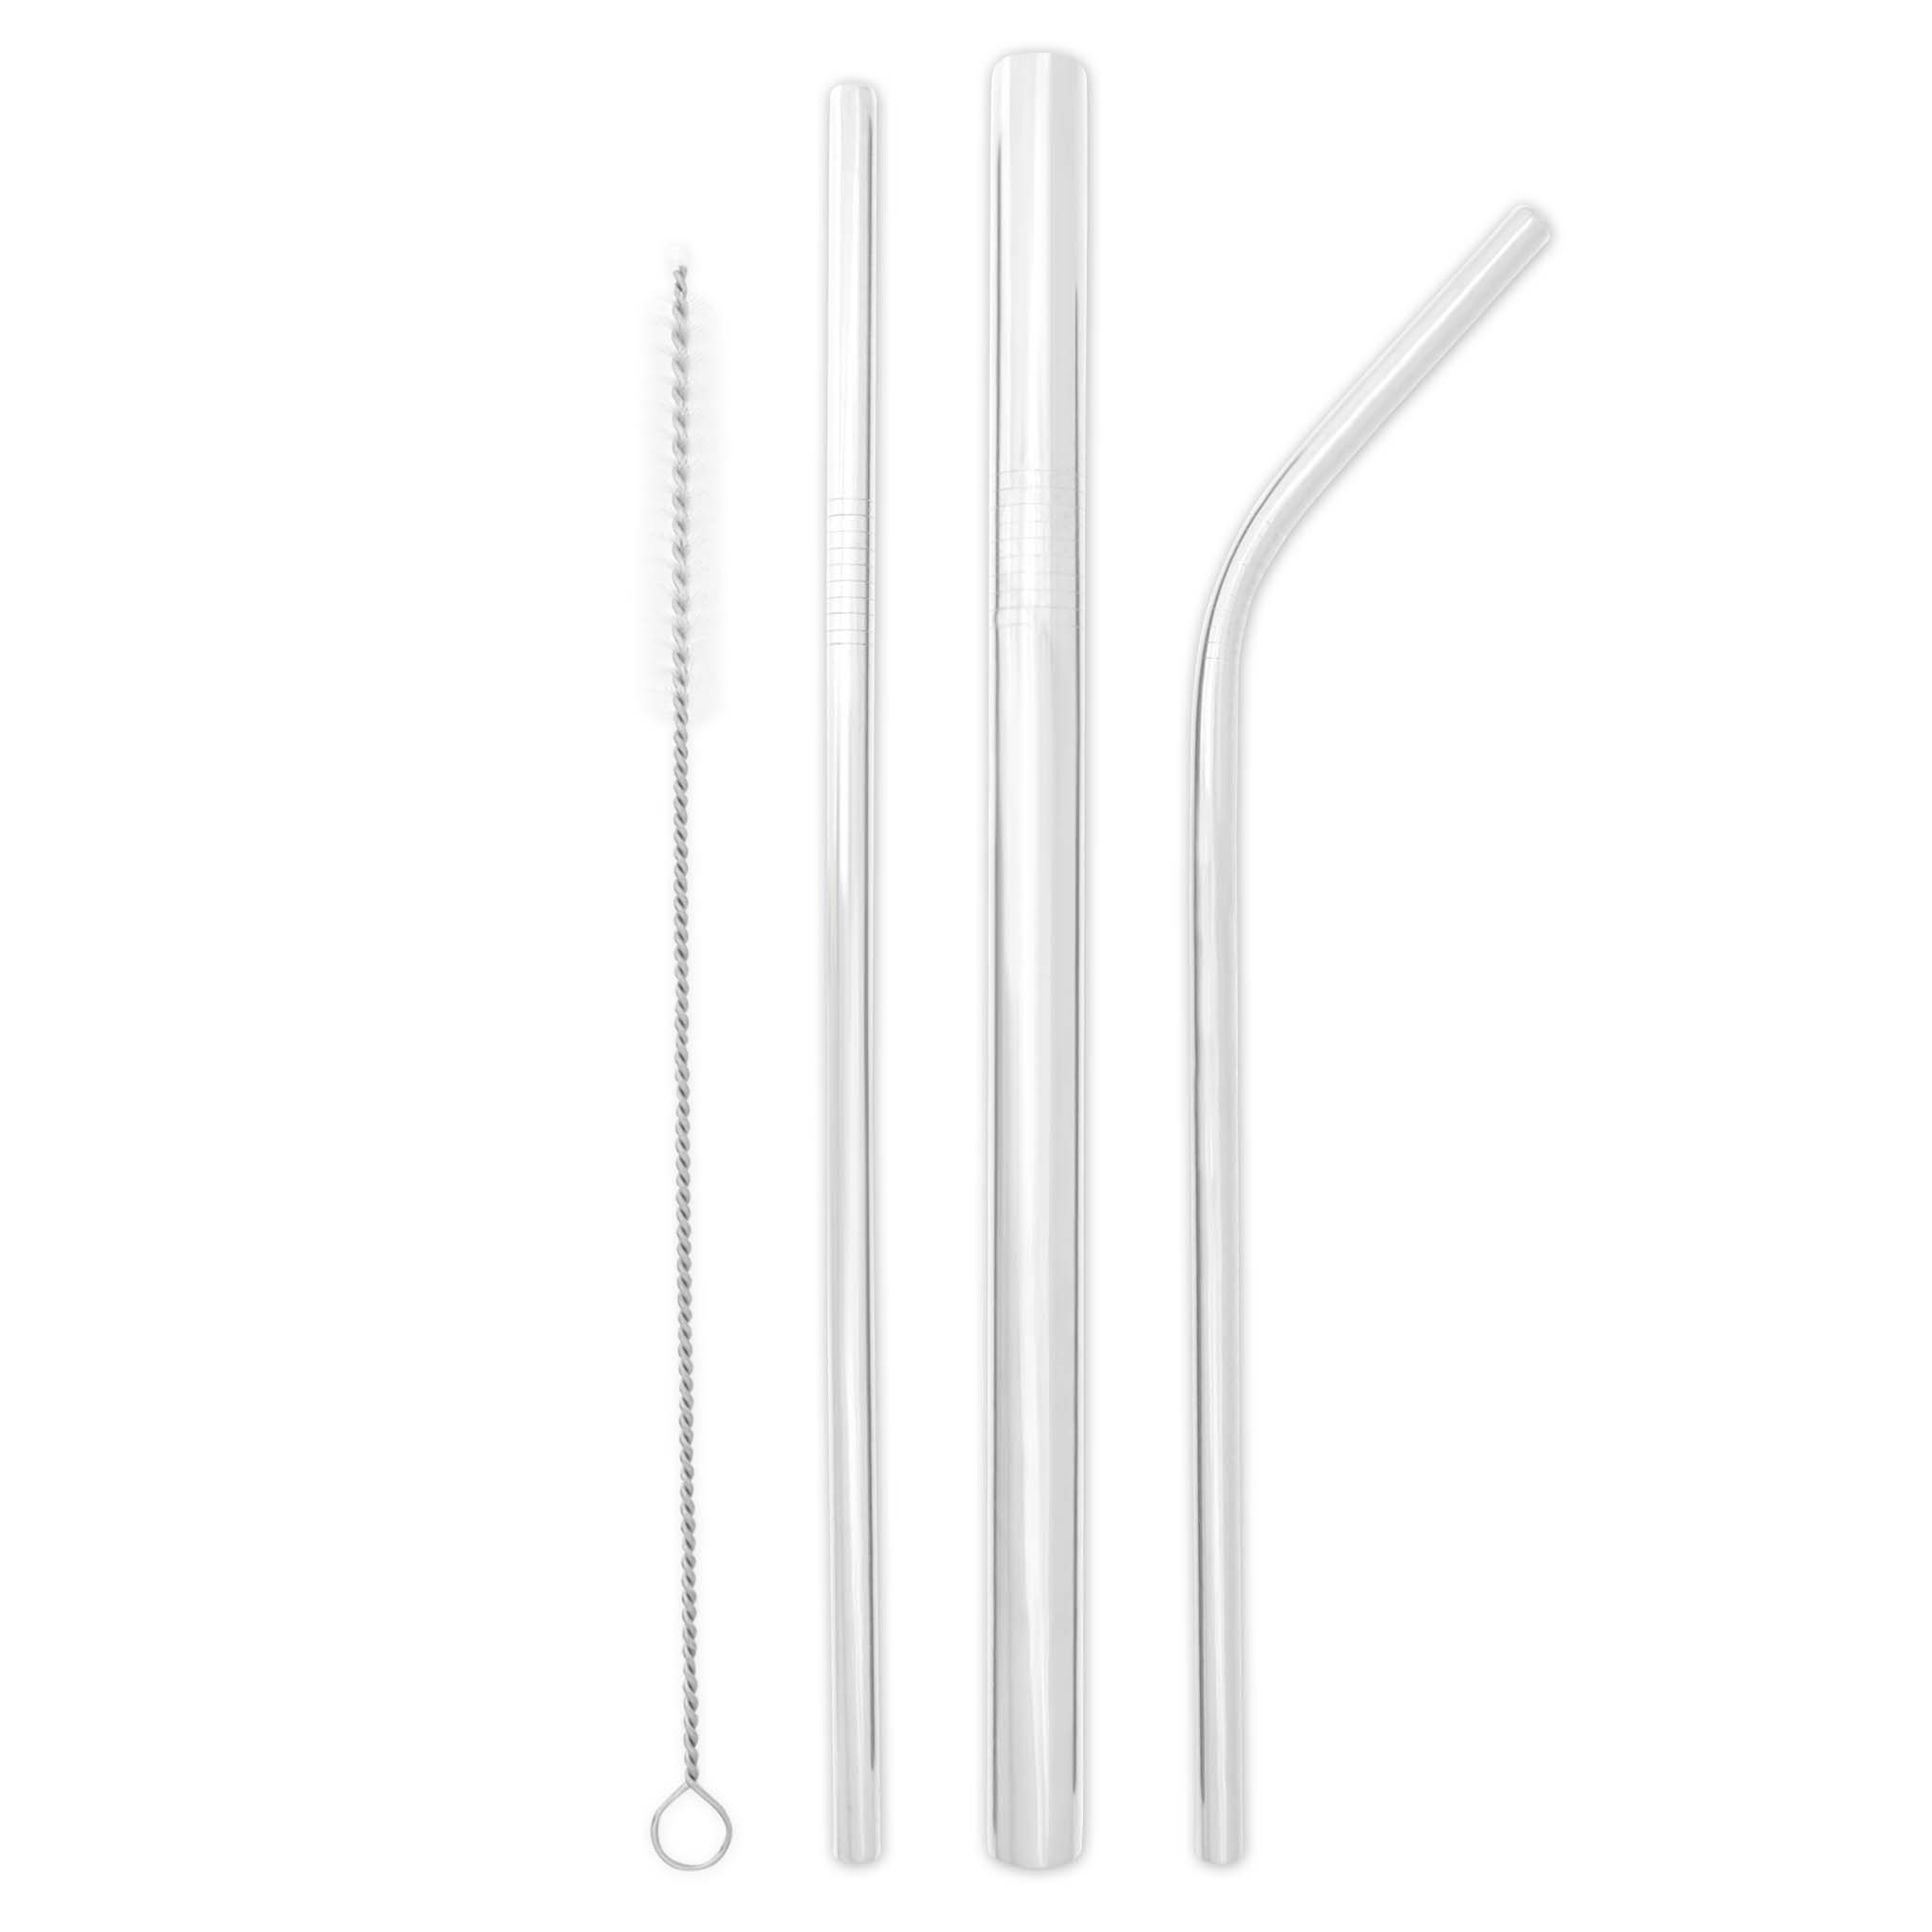 Triple Threat Stainless Steel Straw Set with Travel Pouch (Silver)